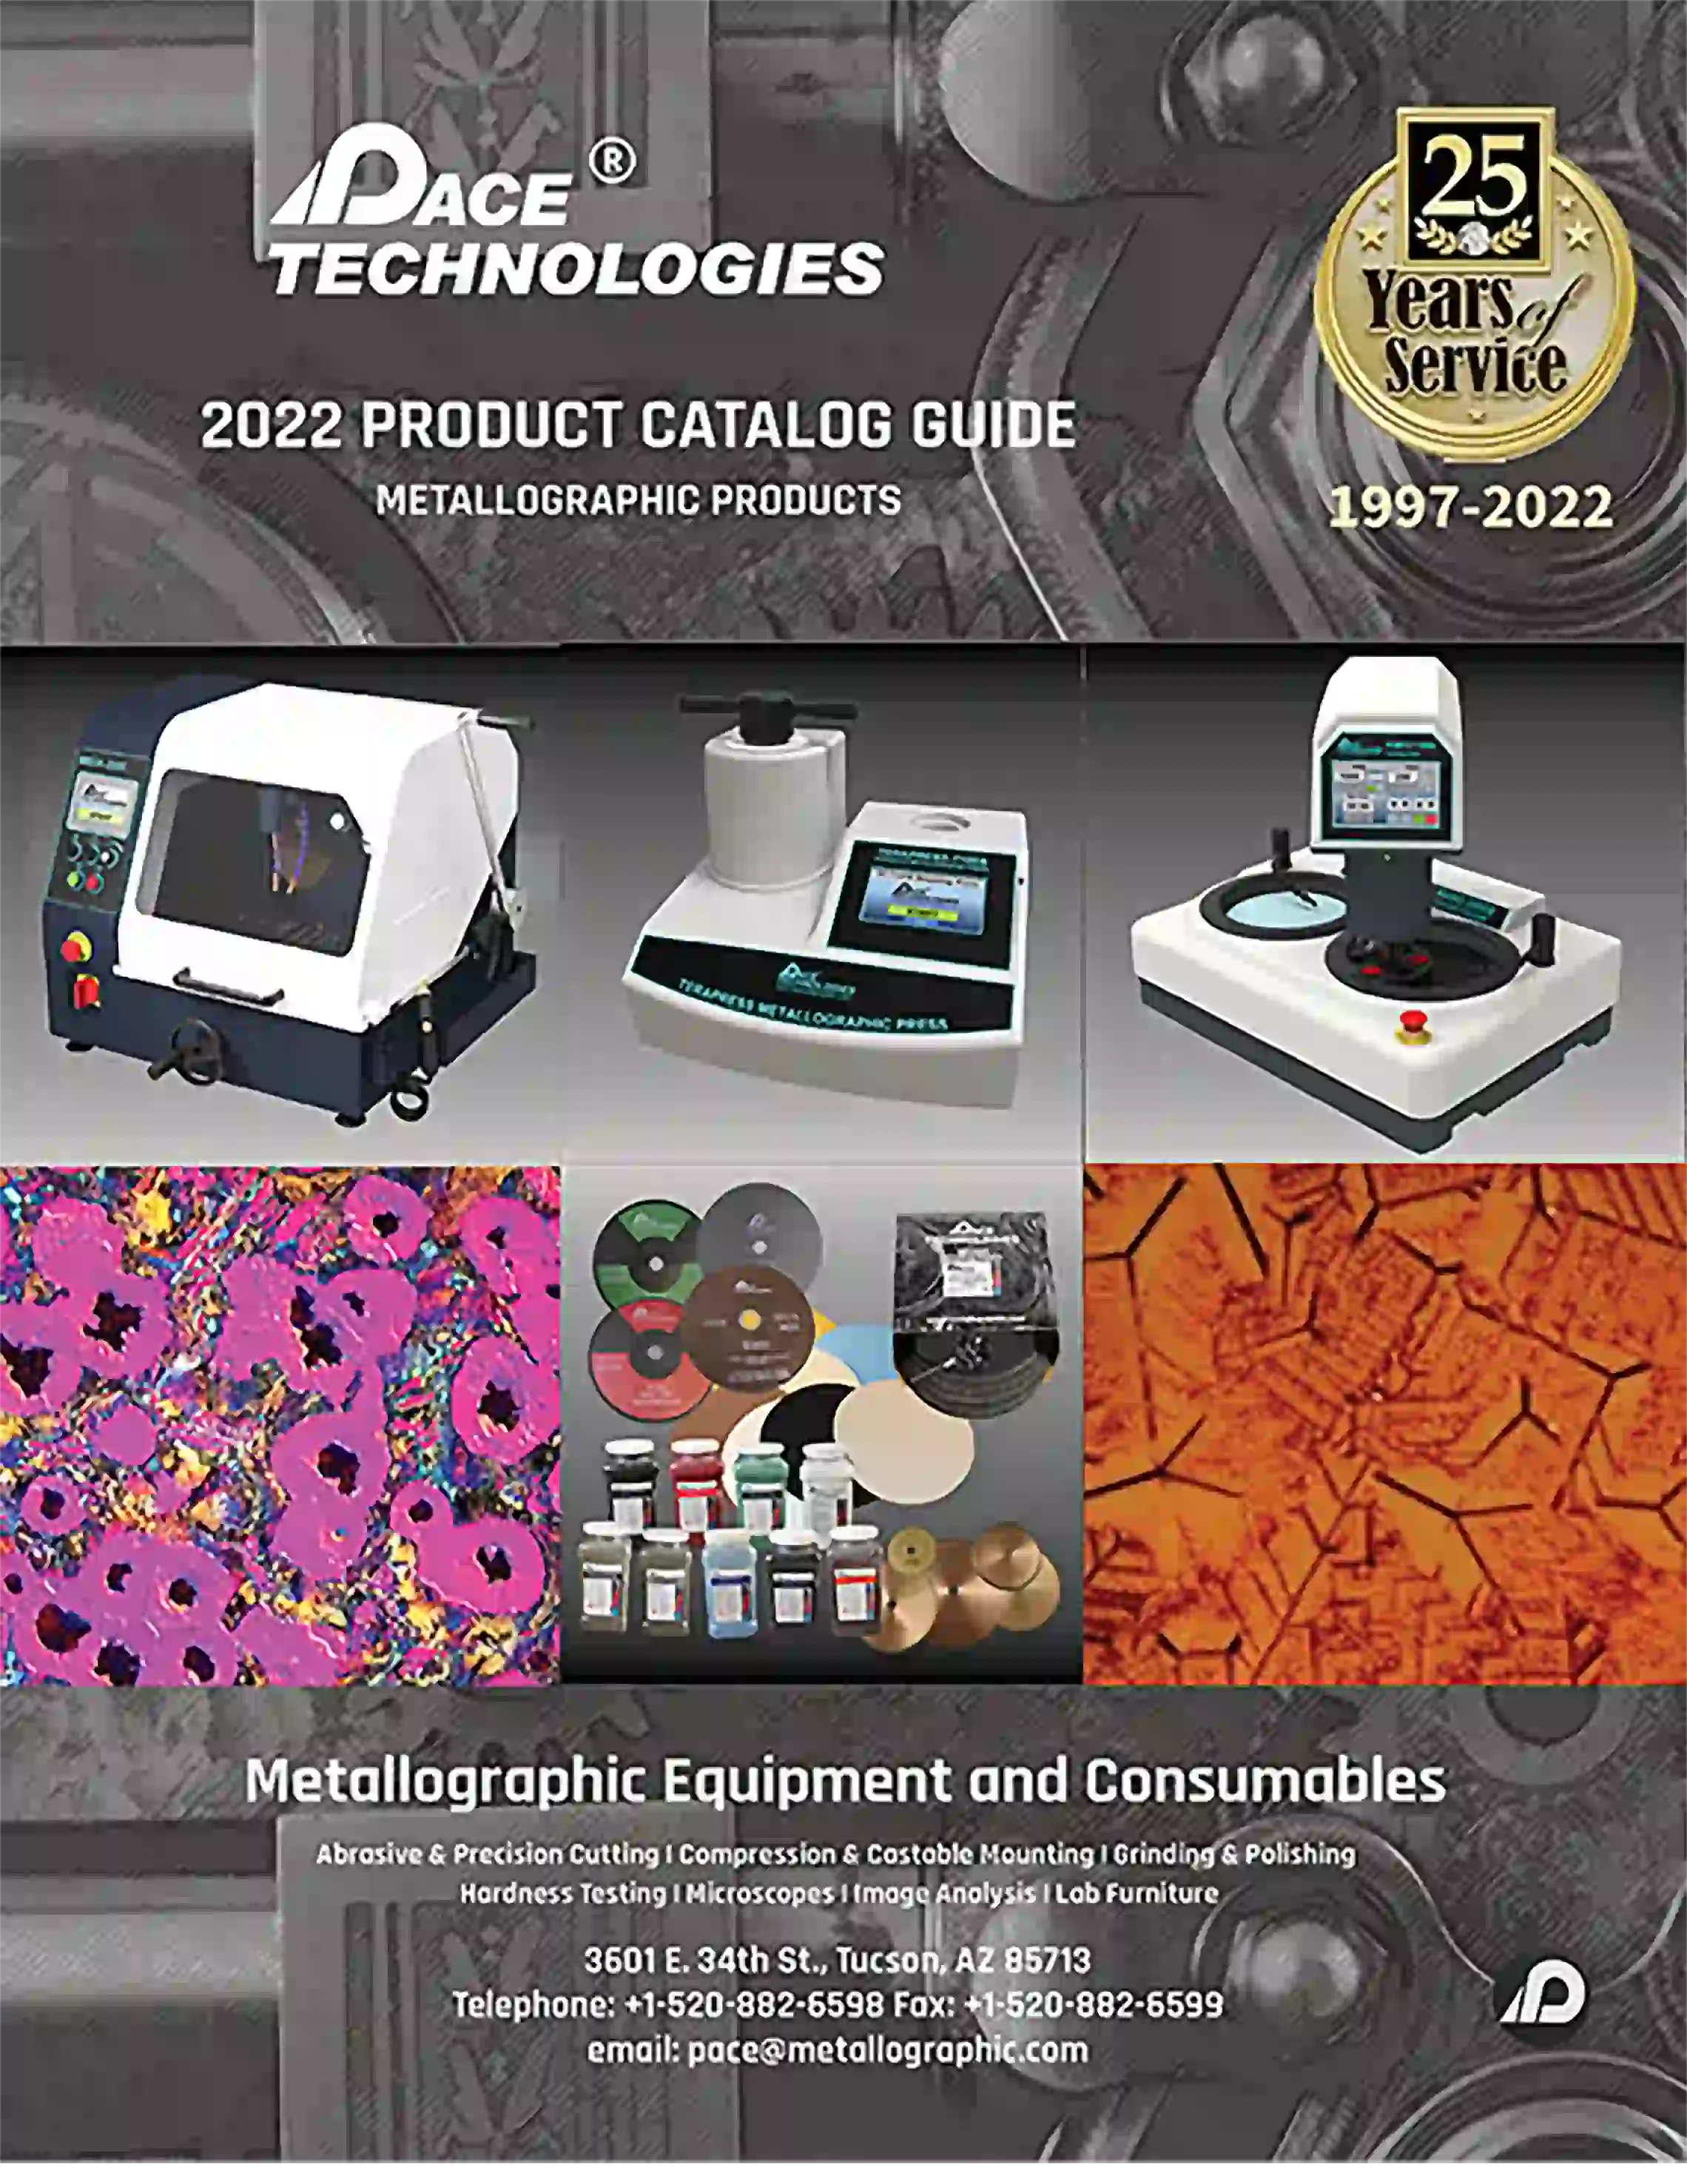 2022 PACE Technologies Metallographic Equipment and Consumables Catalog